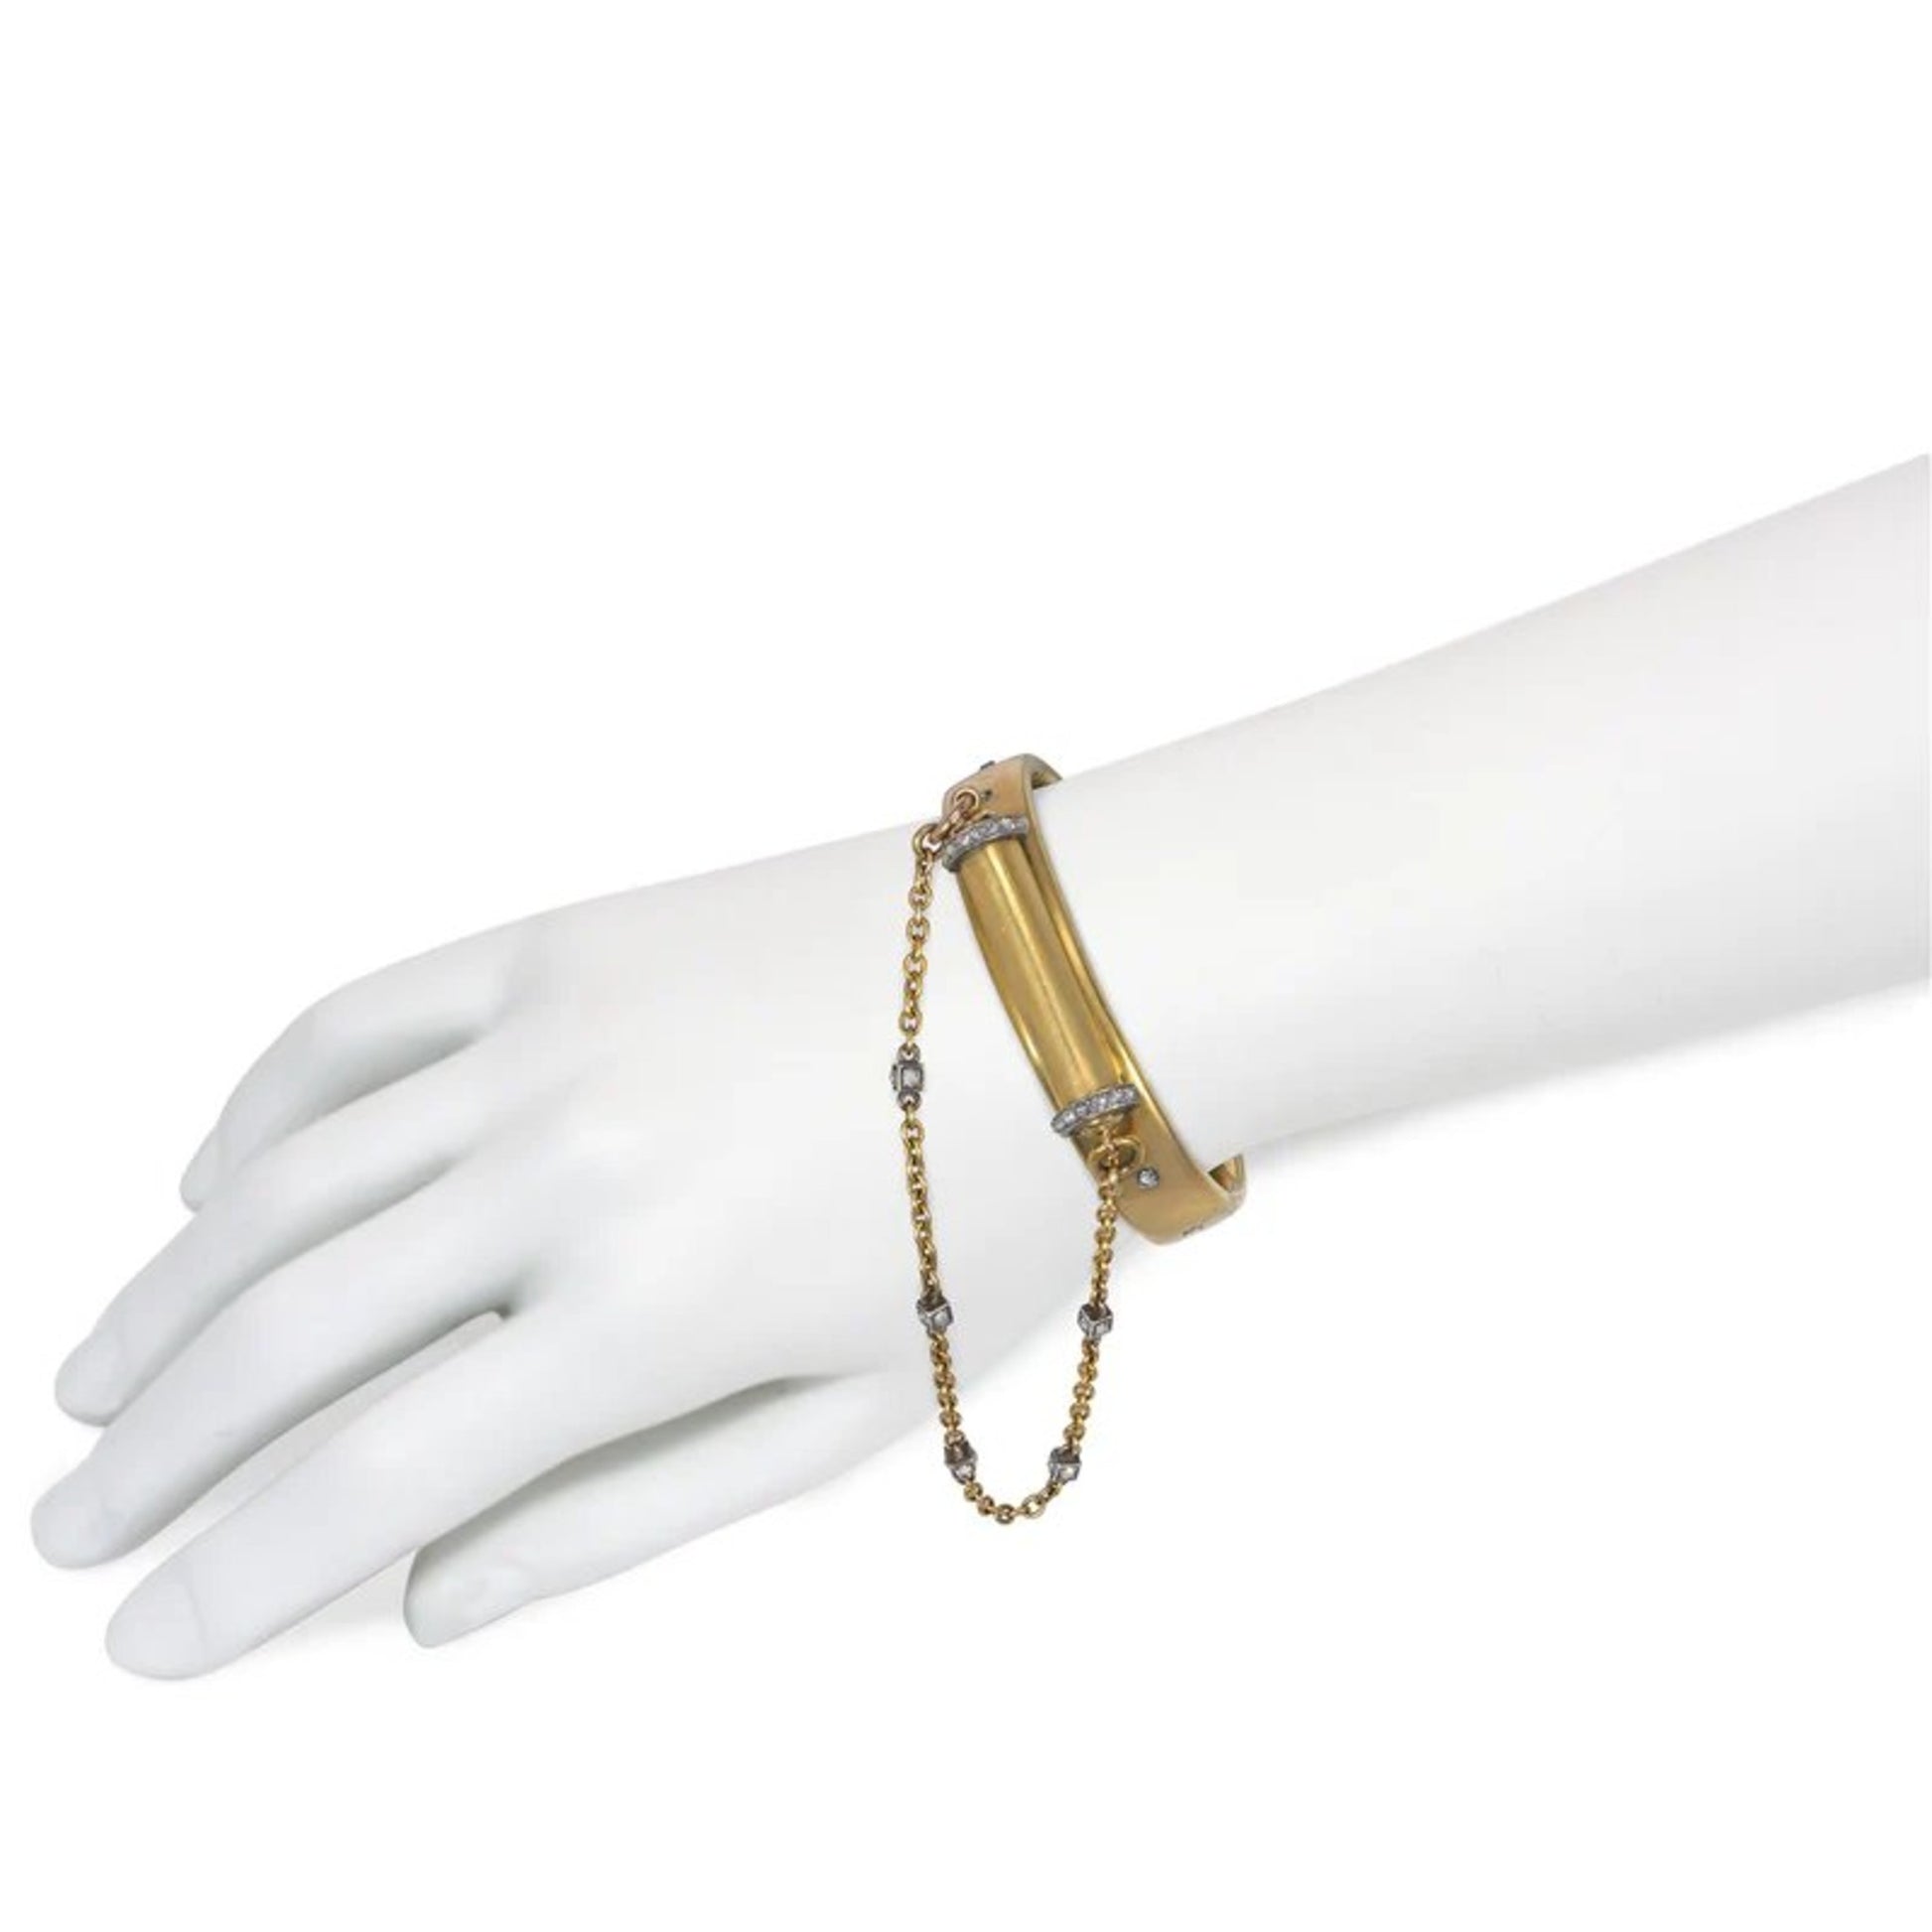 French Victorian Silver & 18KT Yellow Gold Diamond Chain & Pencil Bracelet on wrist